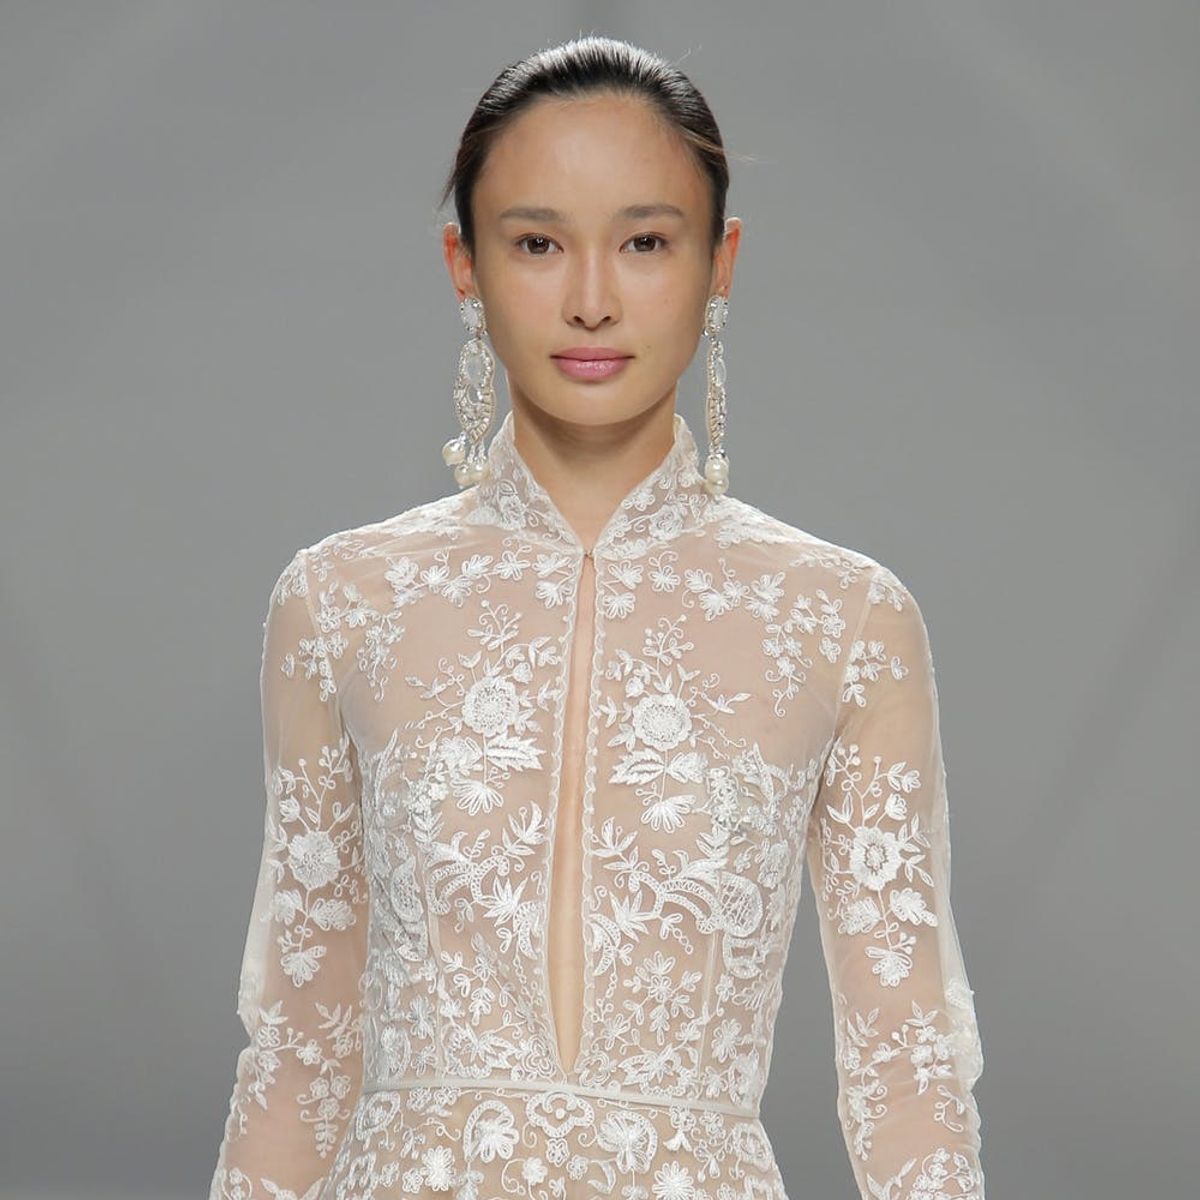 The 8 Most Inspiring Dress Trends from Barcelona Bridal Fashion Week